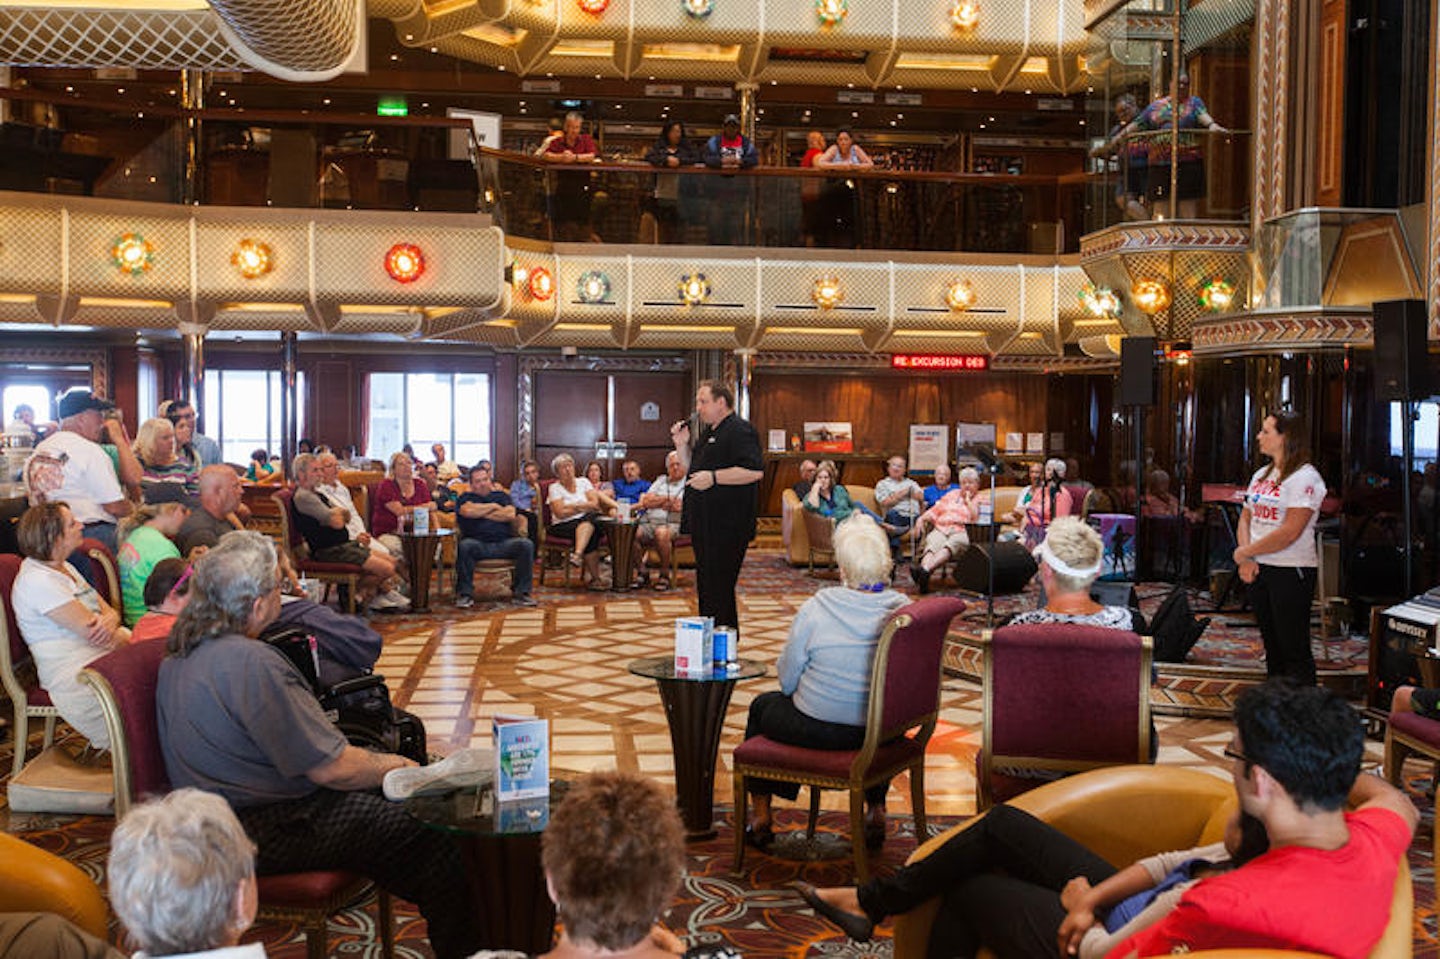 Q&A with Josh on Carnival Conquest